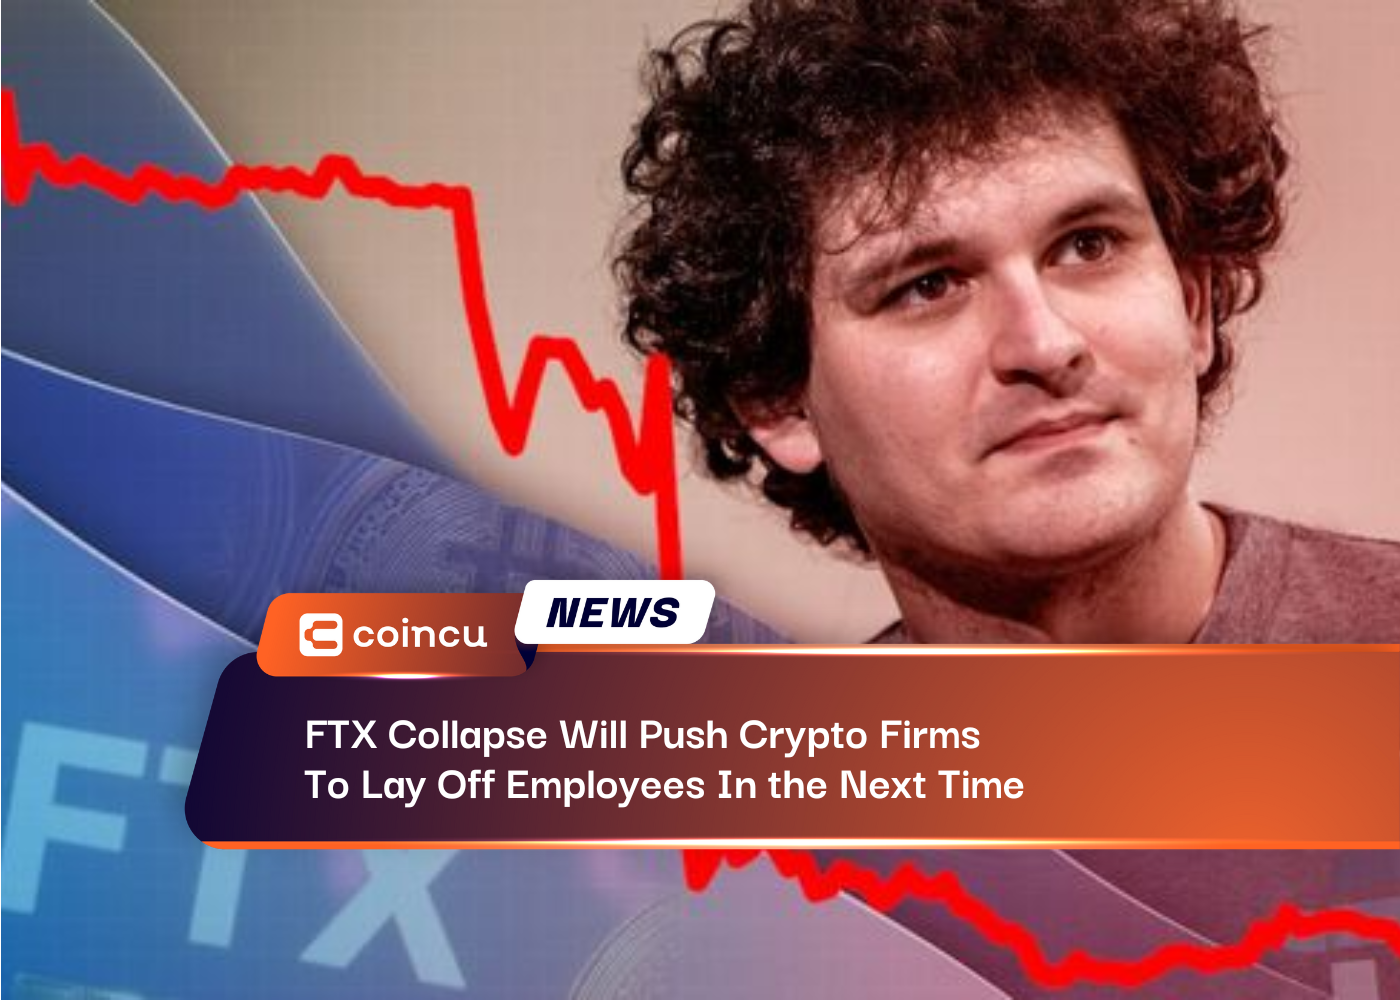 FTX Collapse Will Push Crypto Firms To Lay Off Employees In the Next Time